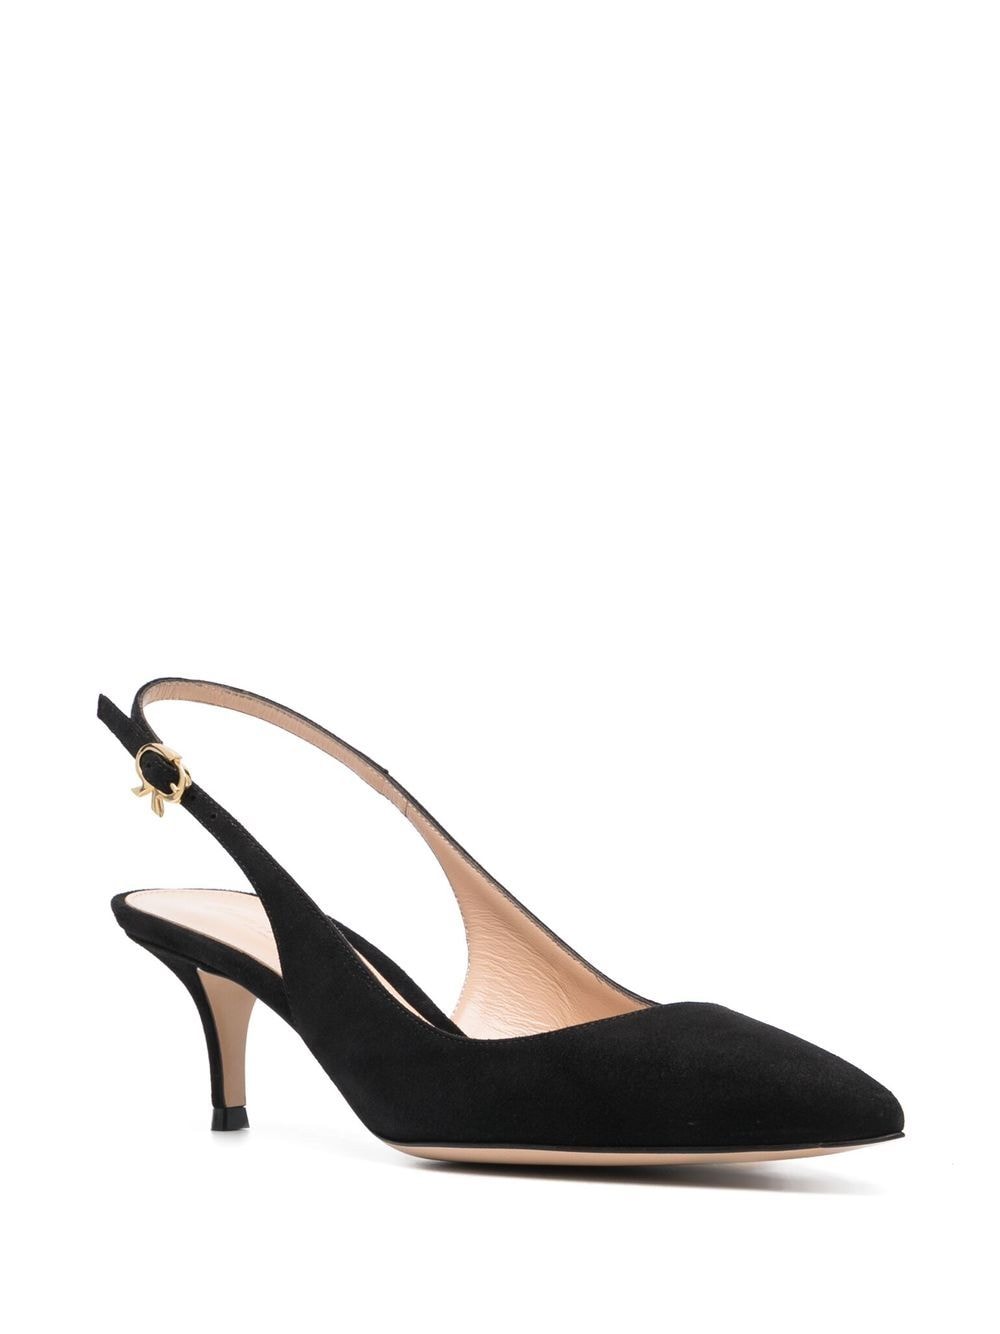 Image 2 of Gianvito Rossi pointed-toe slingback pumps